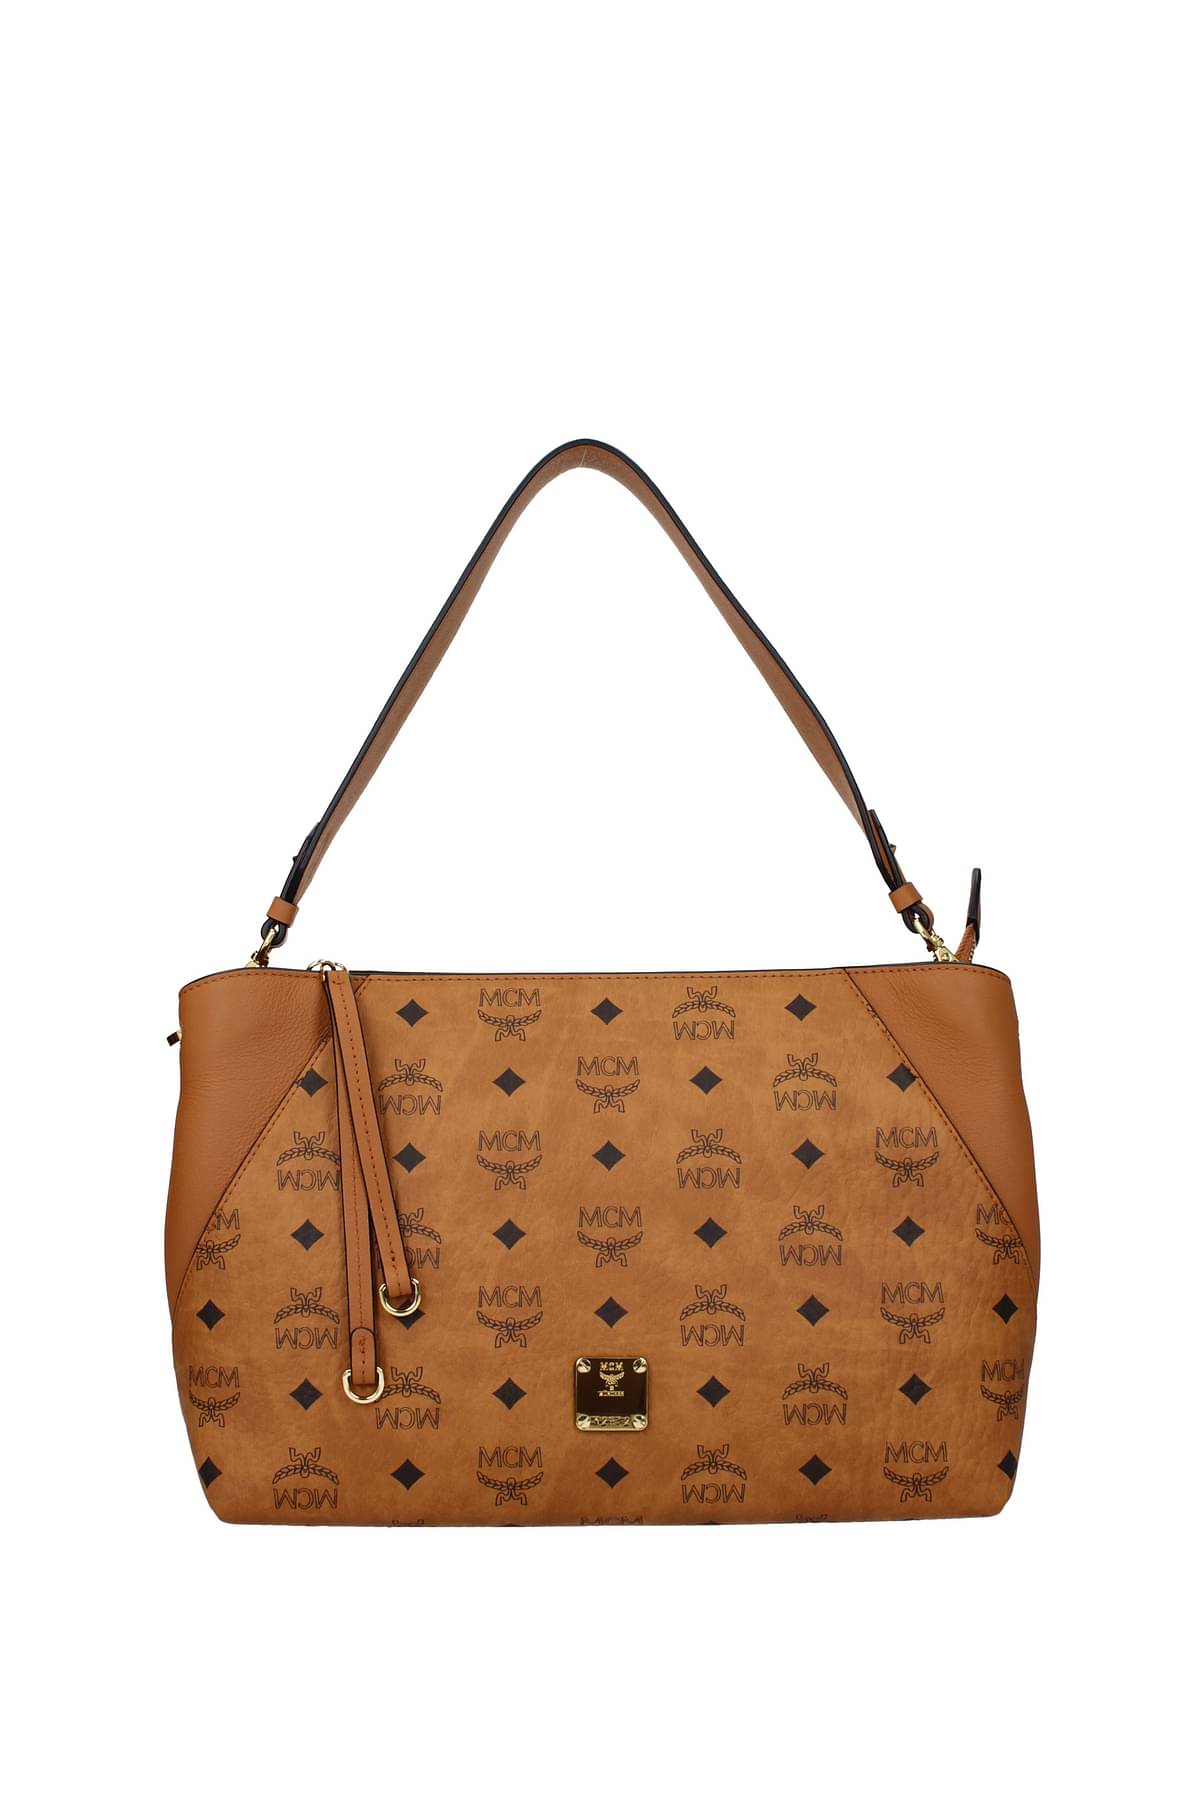 MCM Shoulder bags Women MWSAAKM01CO001 Leather Brown 584€